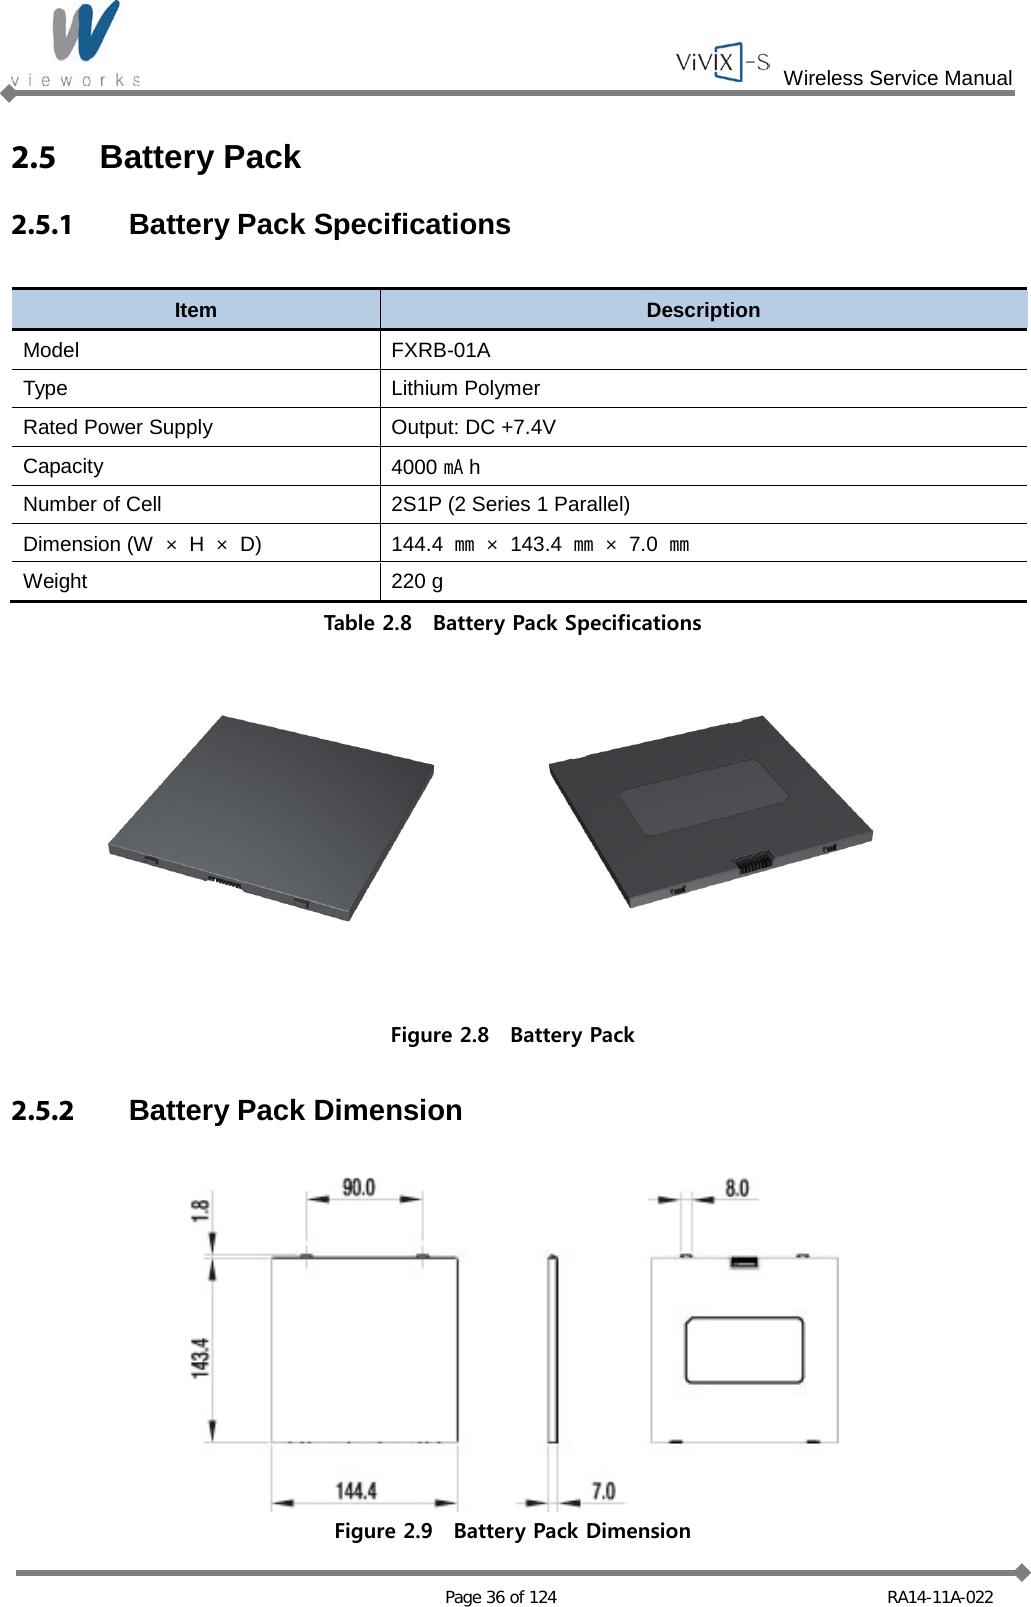  Wireless Service Manual   Page 36 of 124 RA14-11A-022 2.5  Battery Pack 2.5.1  Battery Pack Specifications  Item Description Model FXRB-01A Type Lithium Polymer Rated Power Supply Output: DC +7.4V Capacity 4000 ㎃h Number of Cell 2S1P (2 Series 1 Parallel) Dimension (W  × H  × D) 144.4  ㎜ ×  143.4  ㎜ ×  7.0  ㎜ Weight 220 g Table 2.8  Battery Pack Specifications  Figure 2.8  Battery Pack  2.5.2 Battery Pack Dimension   Figure 2.9  Battery Pack Dimension 